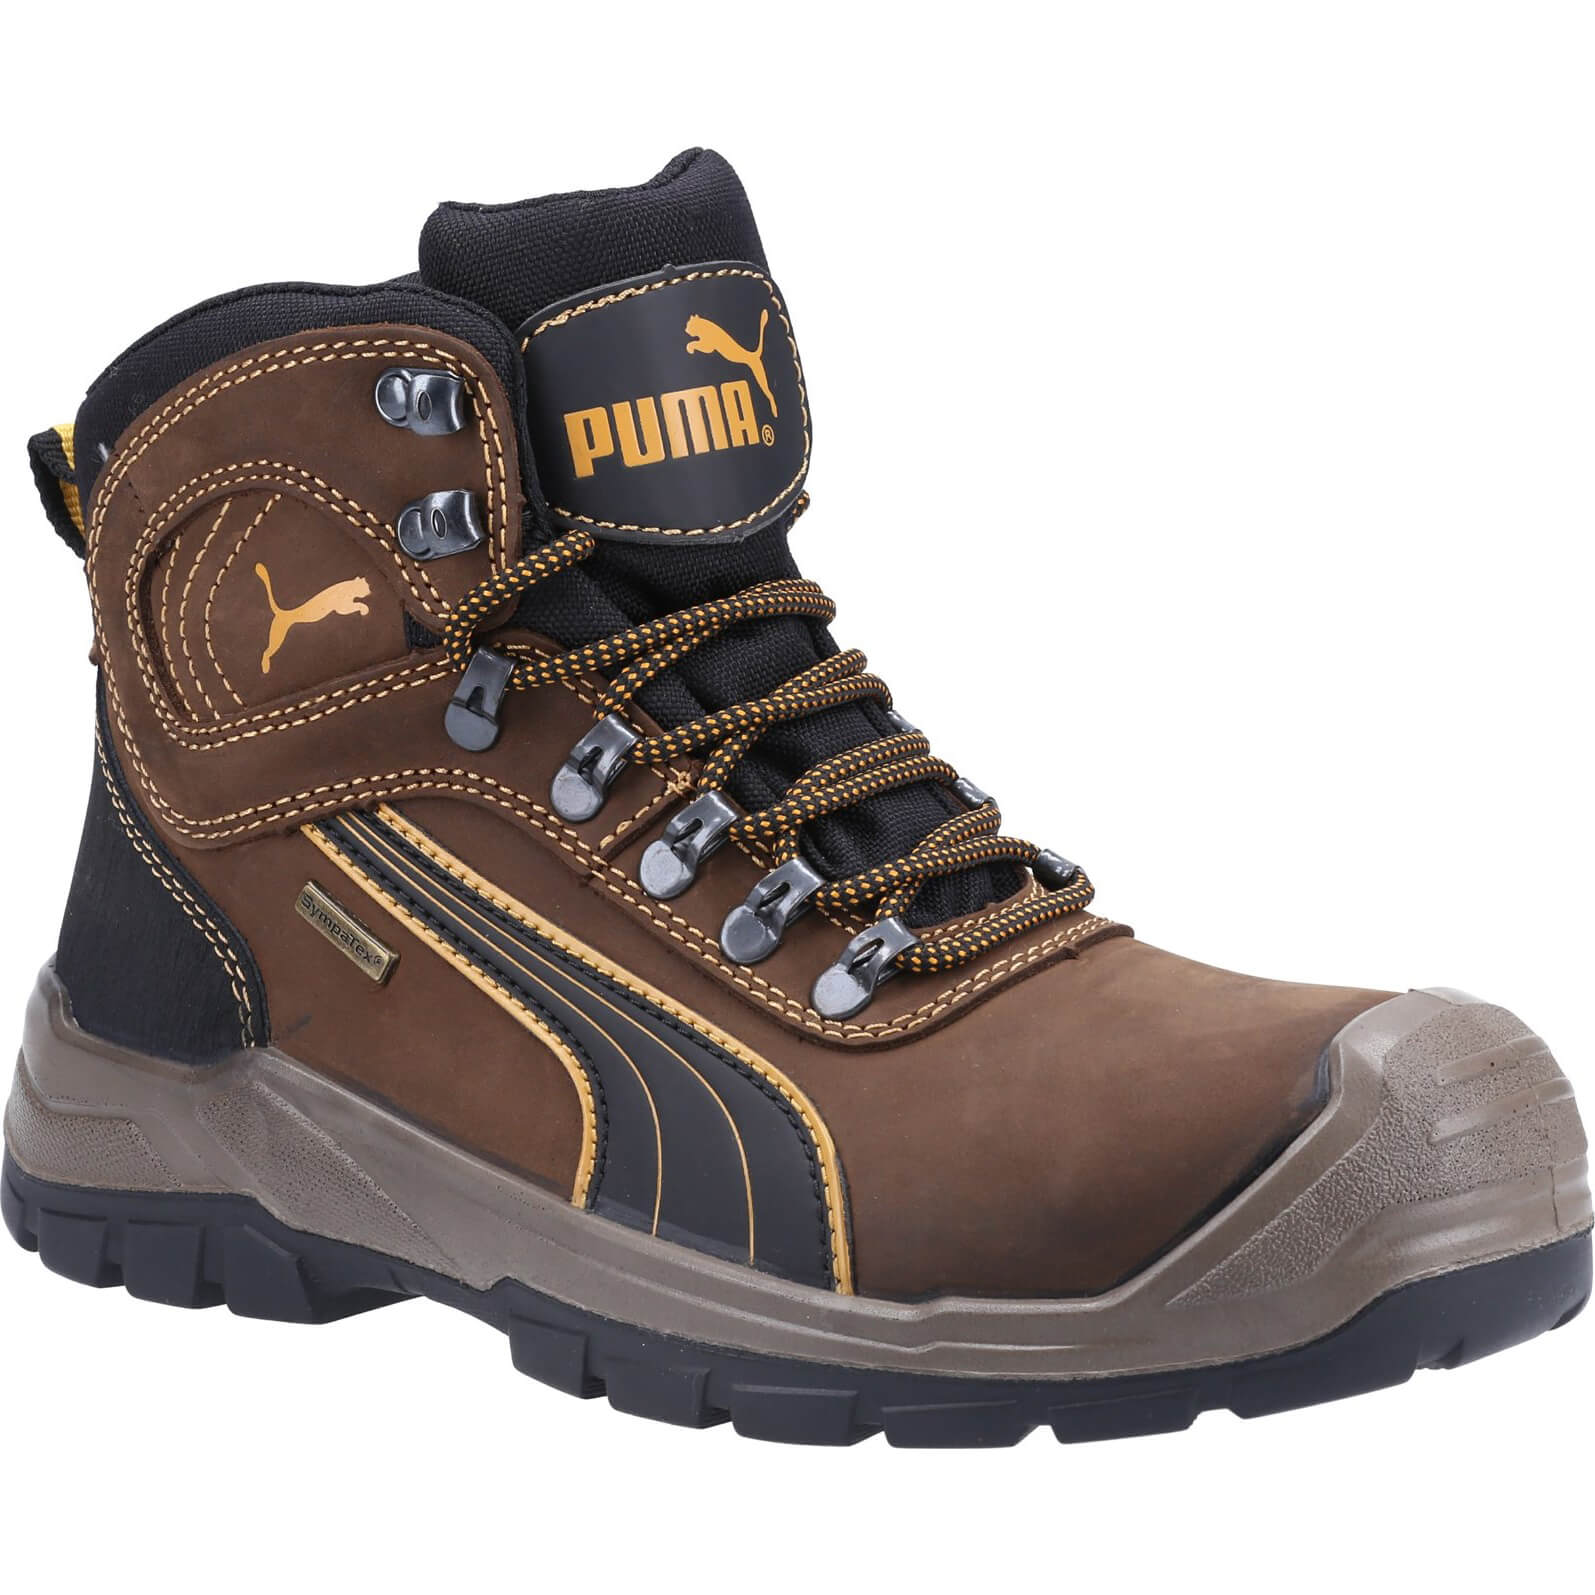 Image of Puma Mens Sierra Nevada Mid Safety Boots Brown Size 10.5